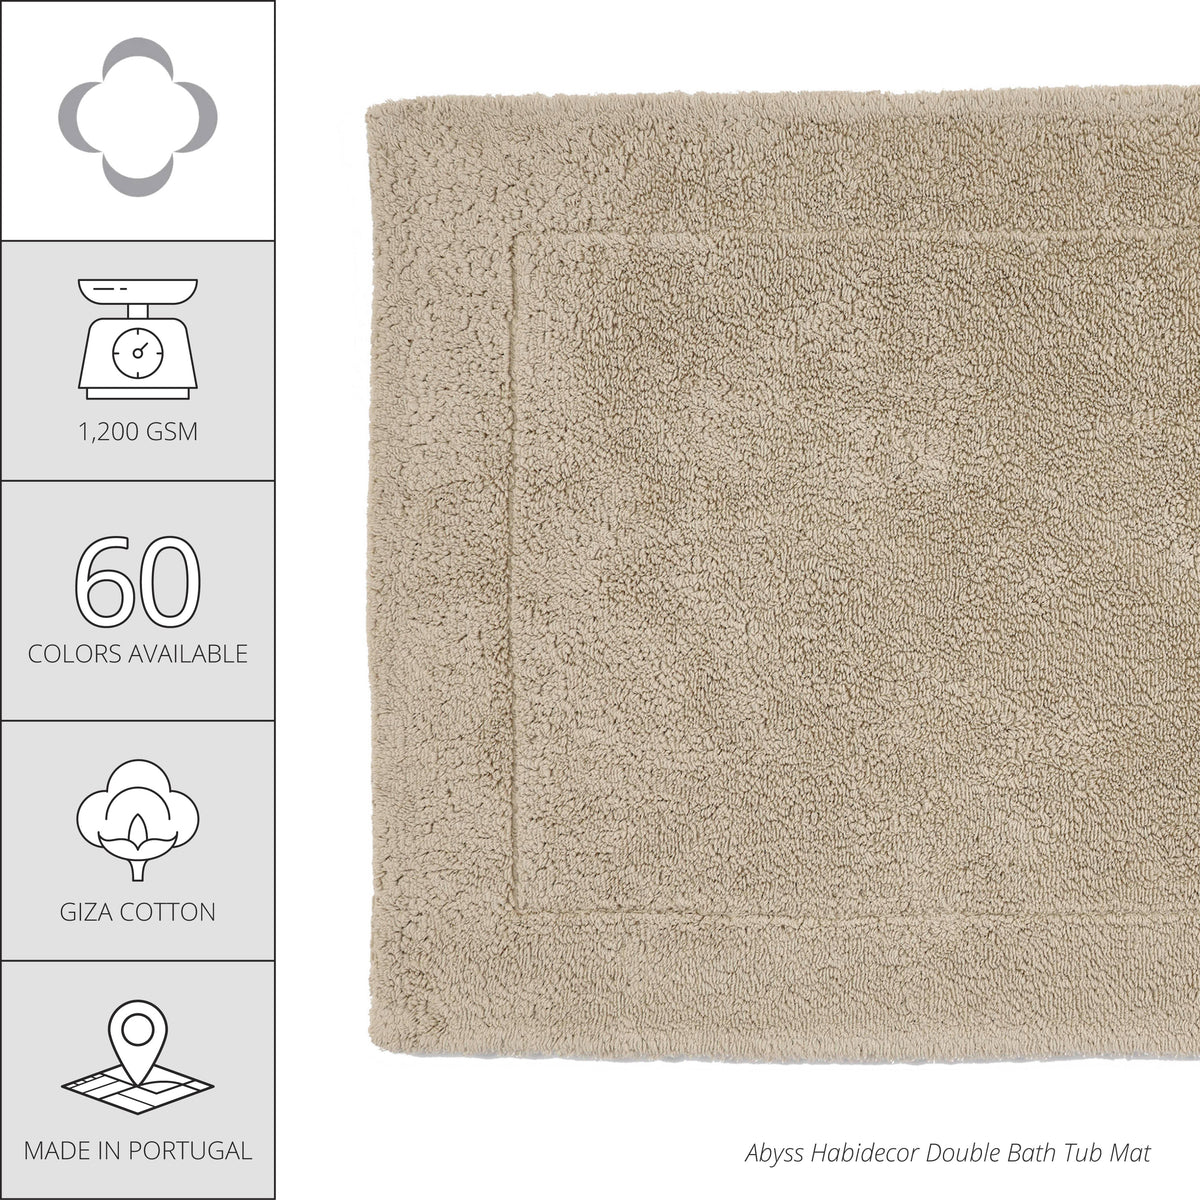 Abyss Double Bath Tub Mat - Ivory (103)